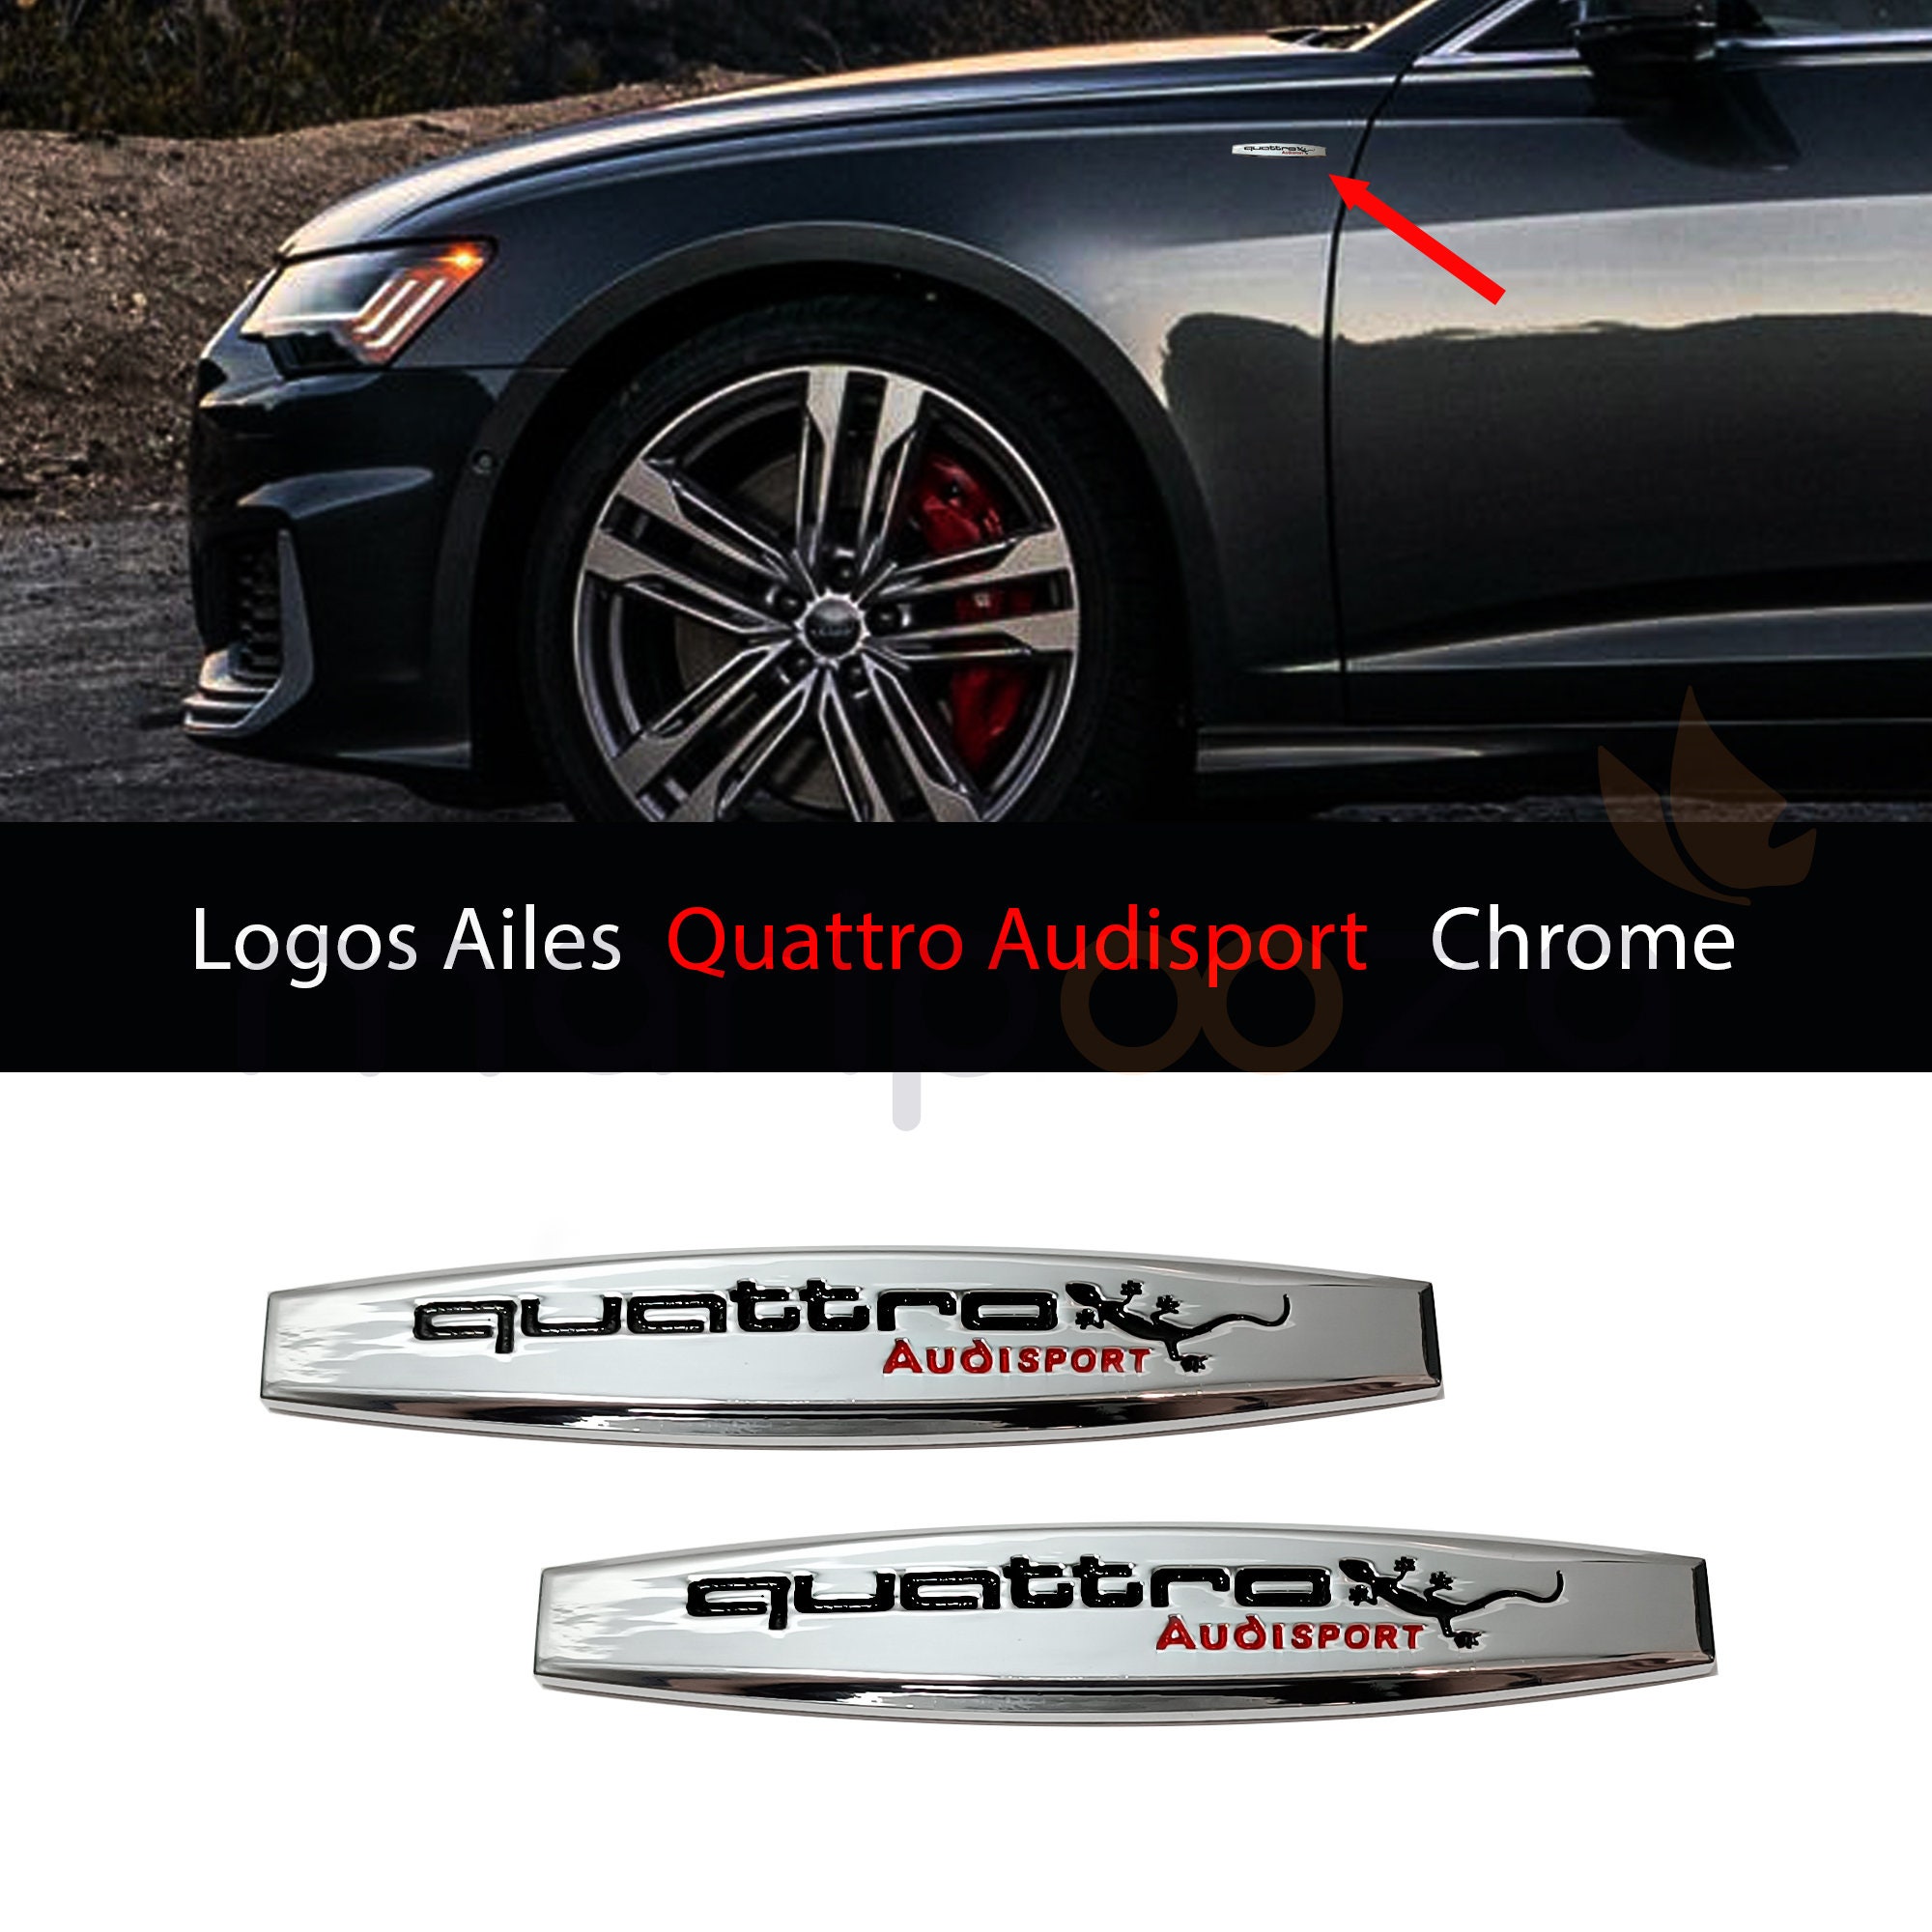 2 x Audi Sports stickers for Wings - Black & Red 